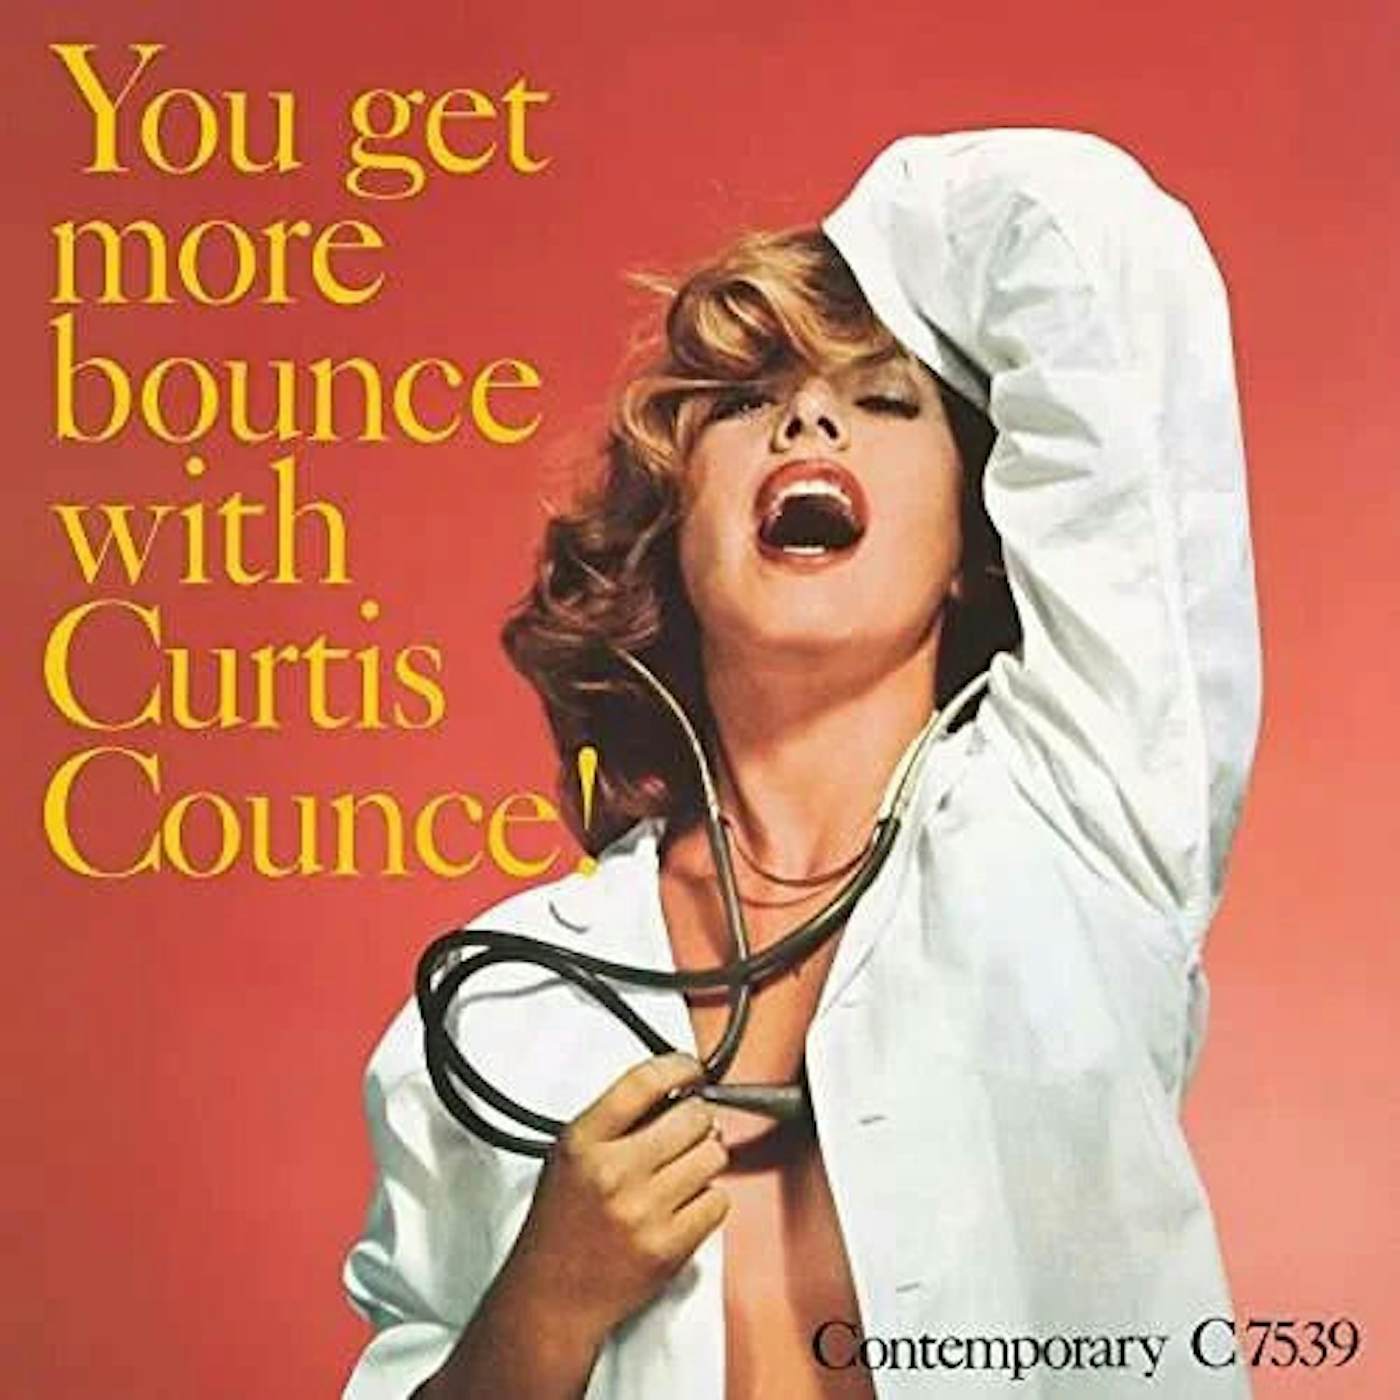 YOU GET MORE BOUNCE WITH CURTIS COUNCE Vinyl Record